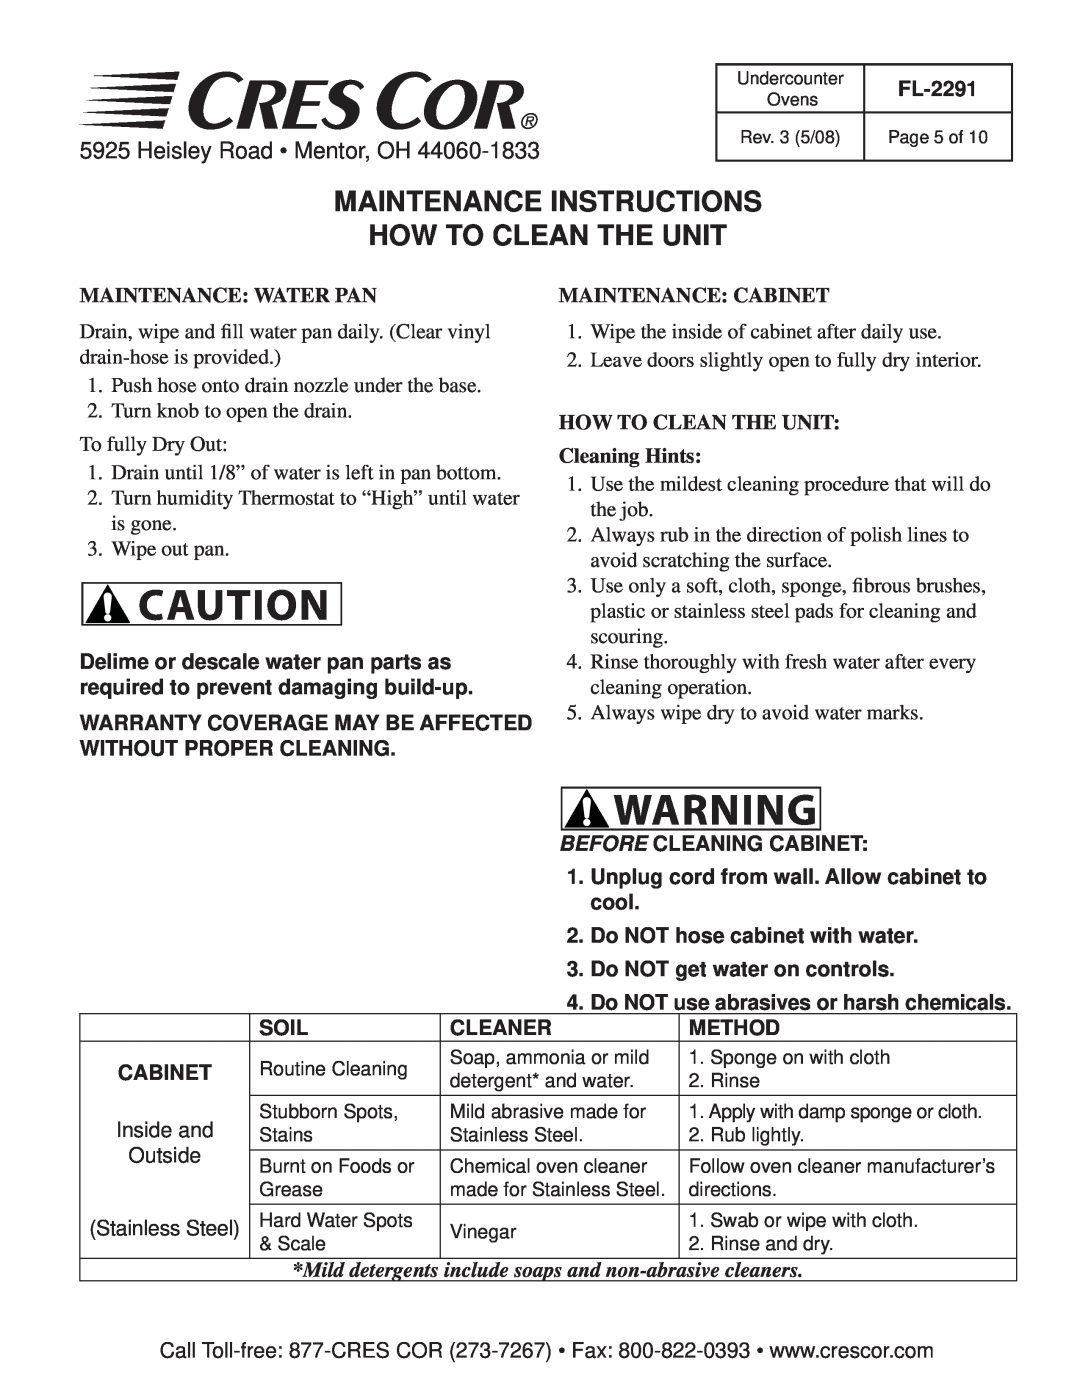 Cres Cor FL-2291 manual Maintenance Instructions How To Clean The Unit, Heisley Road Mentor, OH, Maintenance Water Pan 